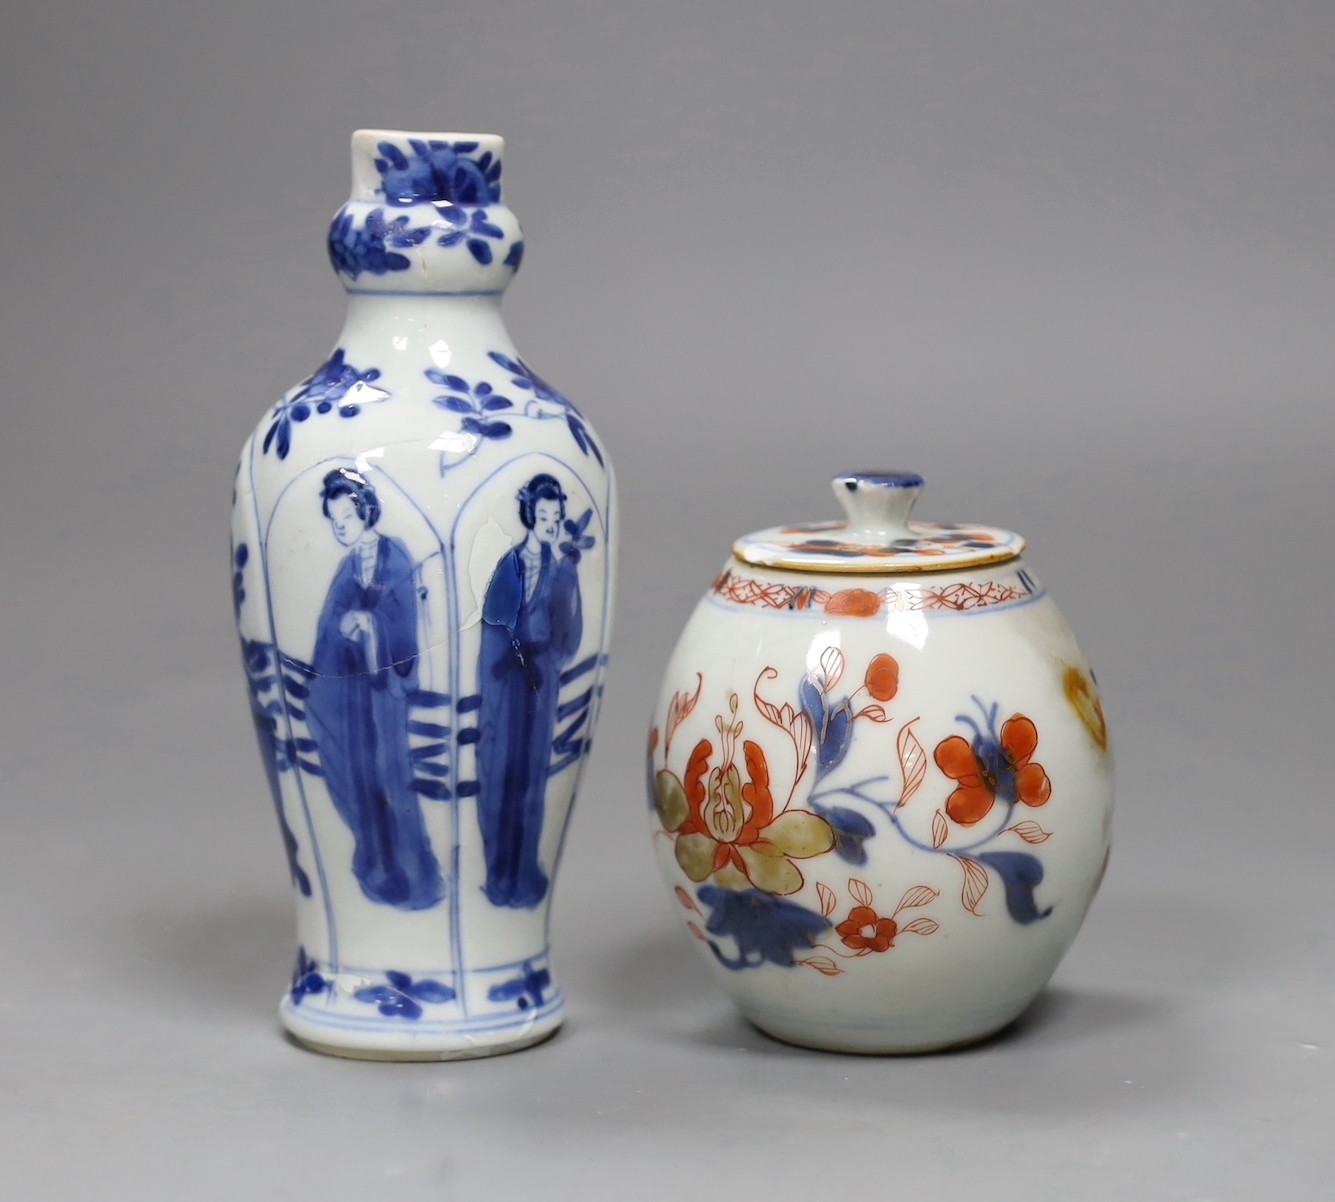 A Chinese Kangxi blue and white small vase, 15cm tall, and an 18th century Chinese Imari pot and cover